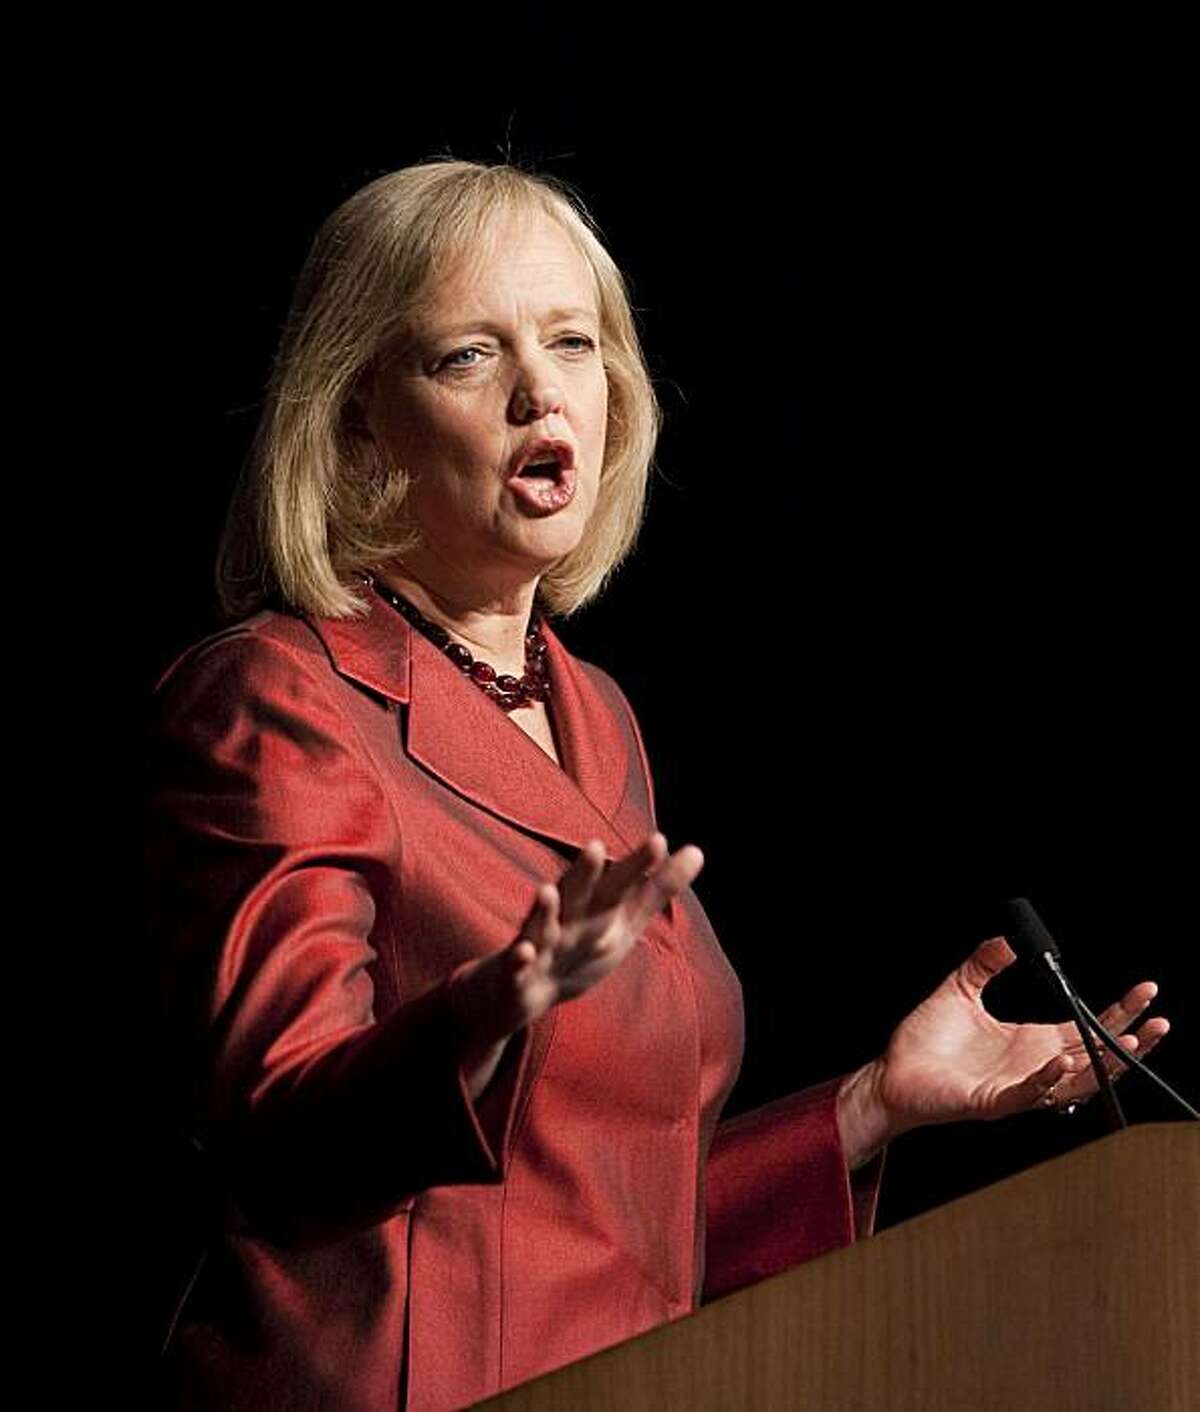 Former eBay chief executive Meg Whitman gives a speech during the California Republican Convention in Indian Wells, Calif., on Saturday, Sept. 26, 2009. Whitman is seeking the Republican nomination for Governor of California. (AP Photo/Francis Specker)